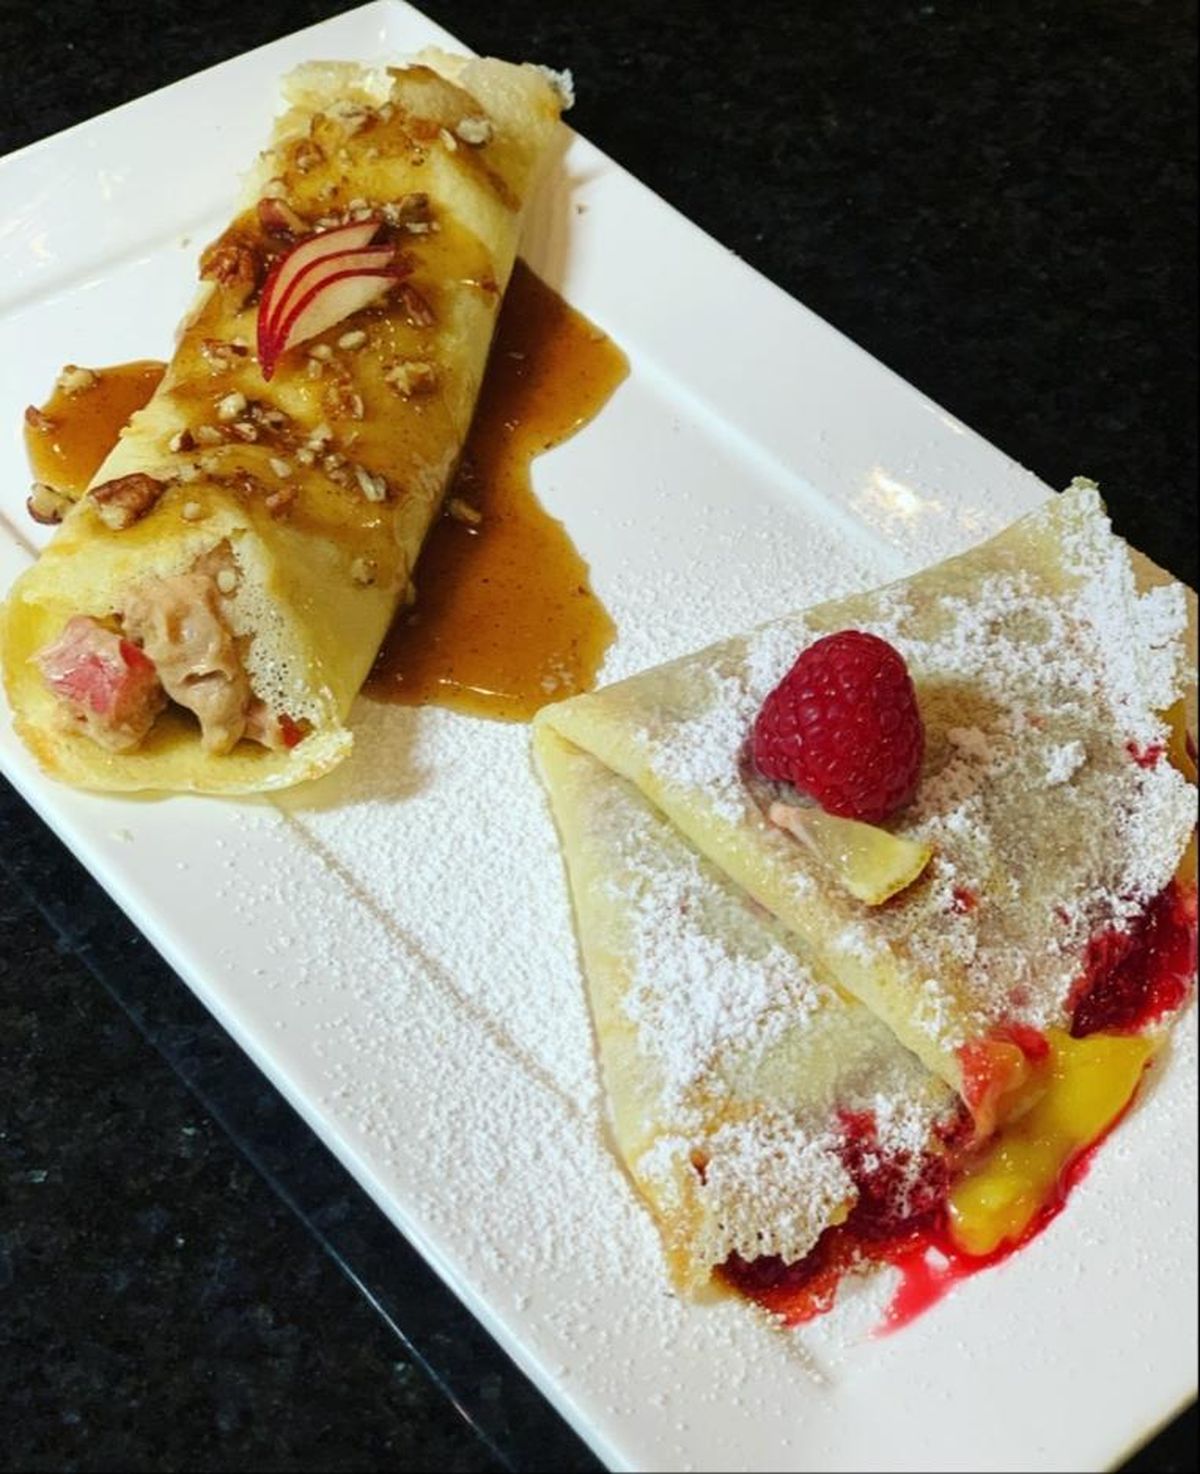 Crepes are a favorite of 17-year-old pastry chef Sarah Kitchings of Candle in the Woods. (Courtesy of Sarah Kitchings)